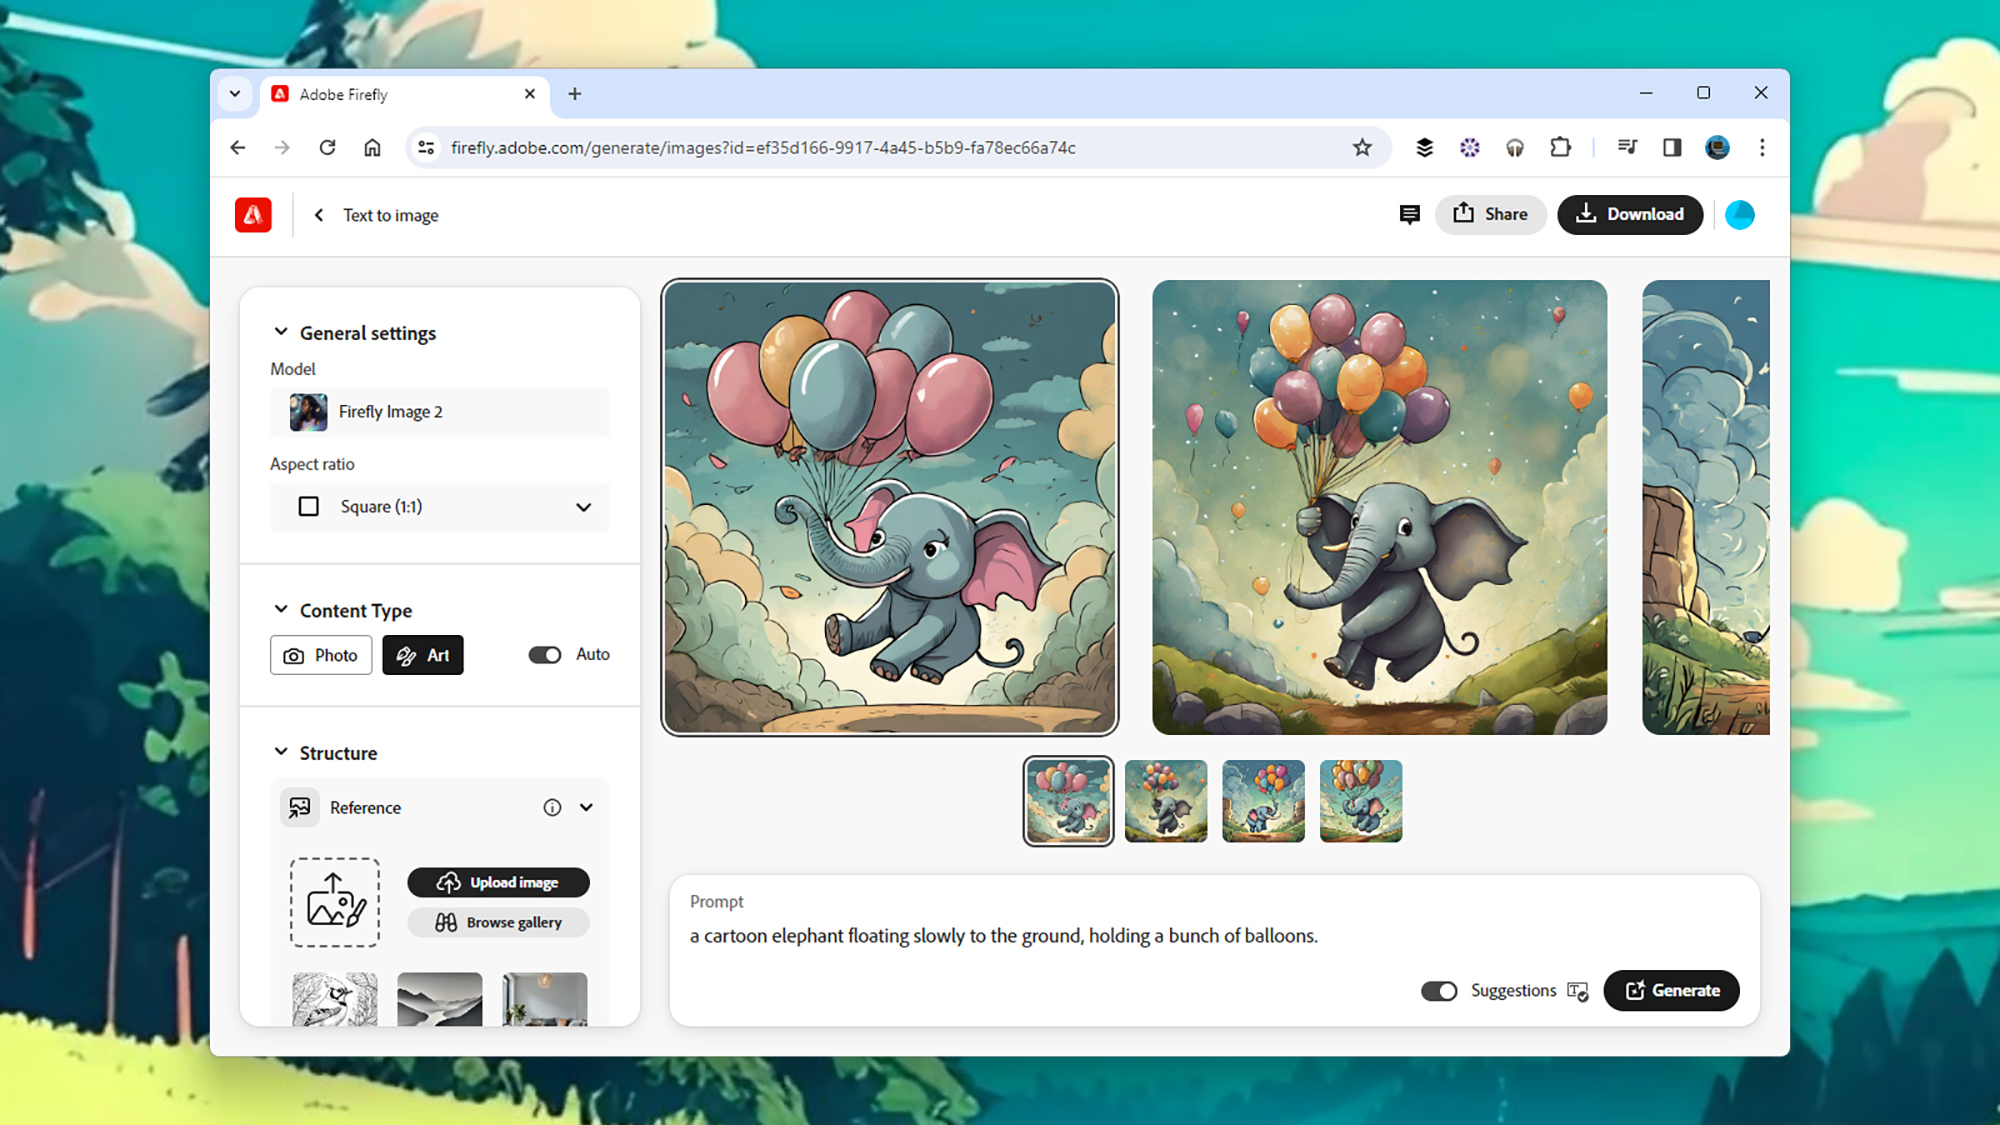 screenshot of adobe firefly with two cartoon elephants holding balloons